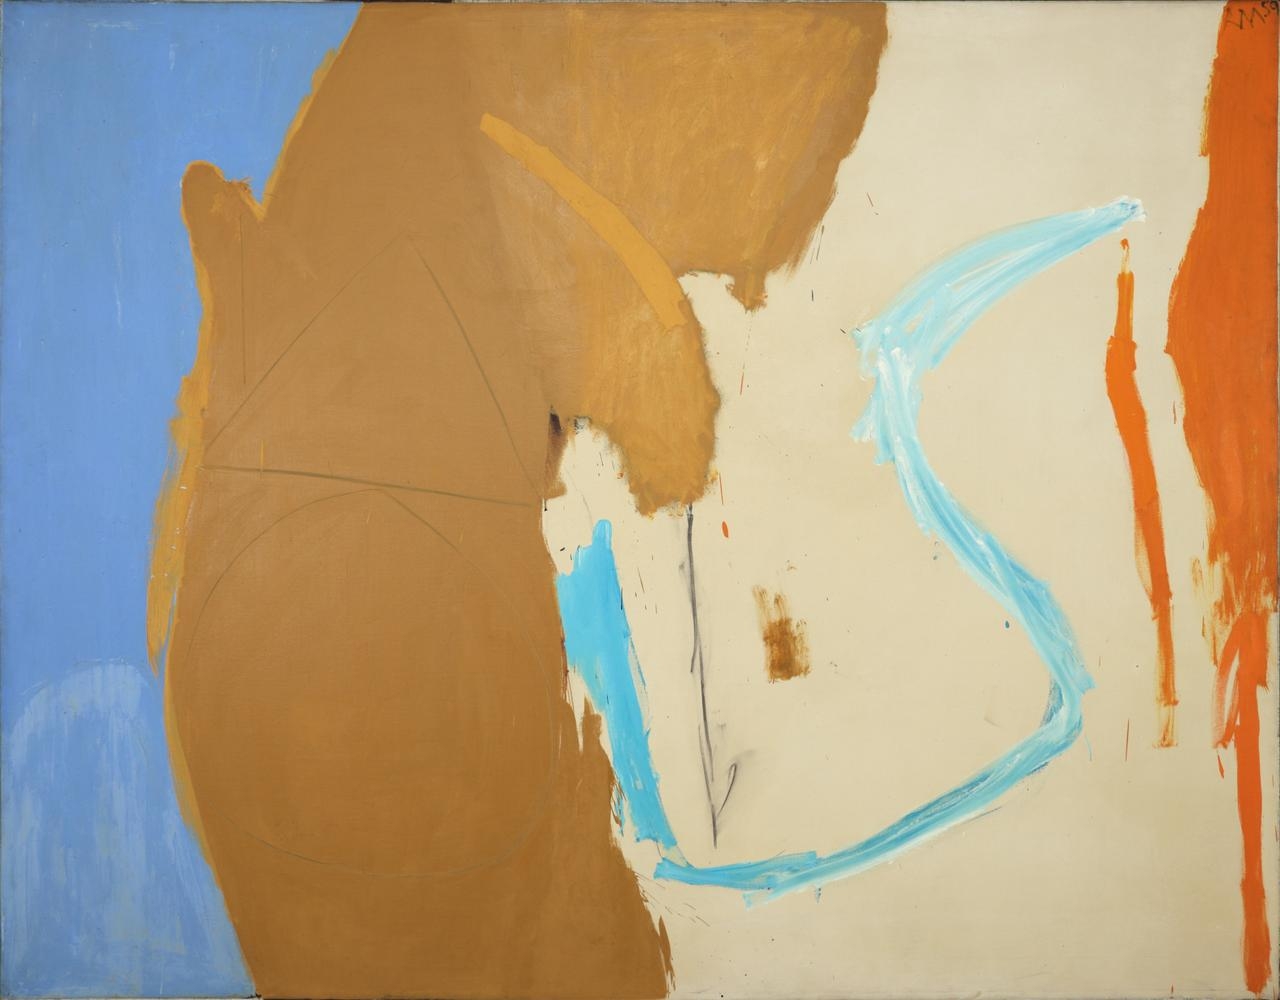 Robert Motherwell
California
1959
oil and charcoal on canvas
69 3/4 x 89 1/2 inches (177.2 x 227.3 cm)&amp;nbsp;